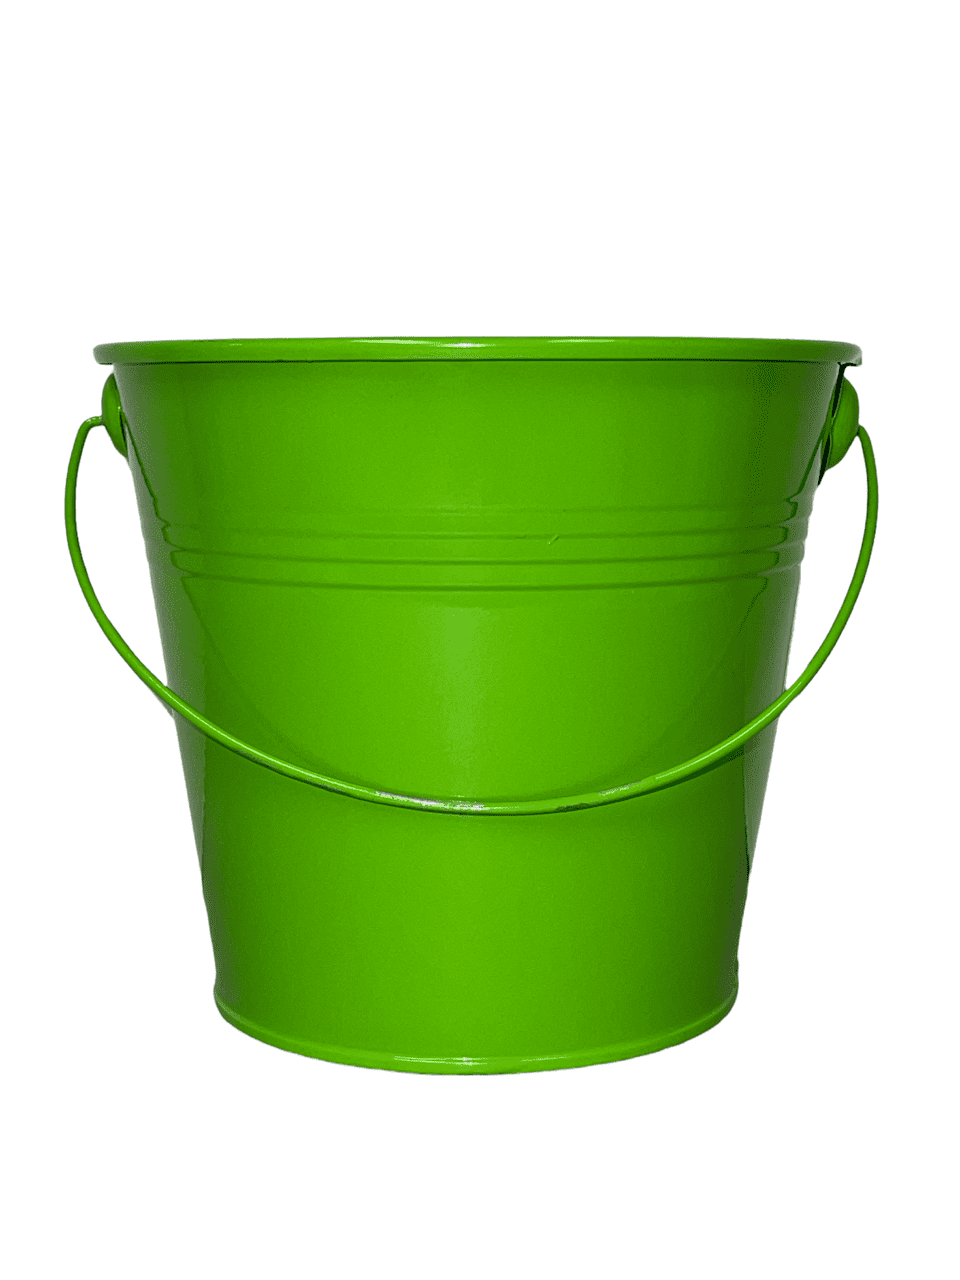 Colored Mini Metal Buckets - 3-Pack Colorful Tin Pails with Handles,  Small-Sized for The Beach, Party Favors, Easter, Candy, or Garden;  5.25X3.75X4.75; Emerald color 